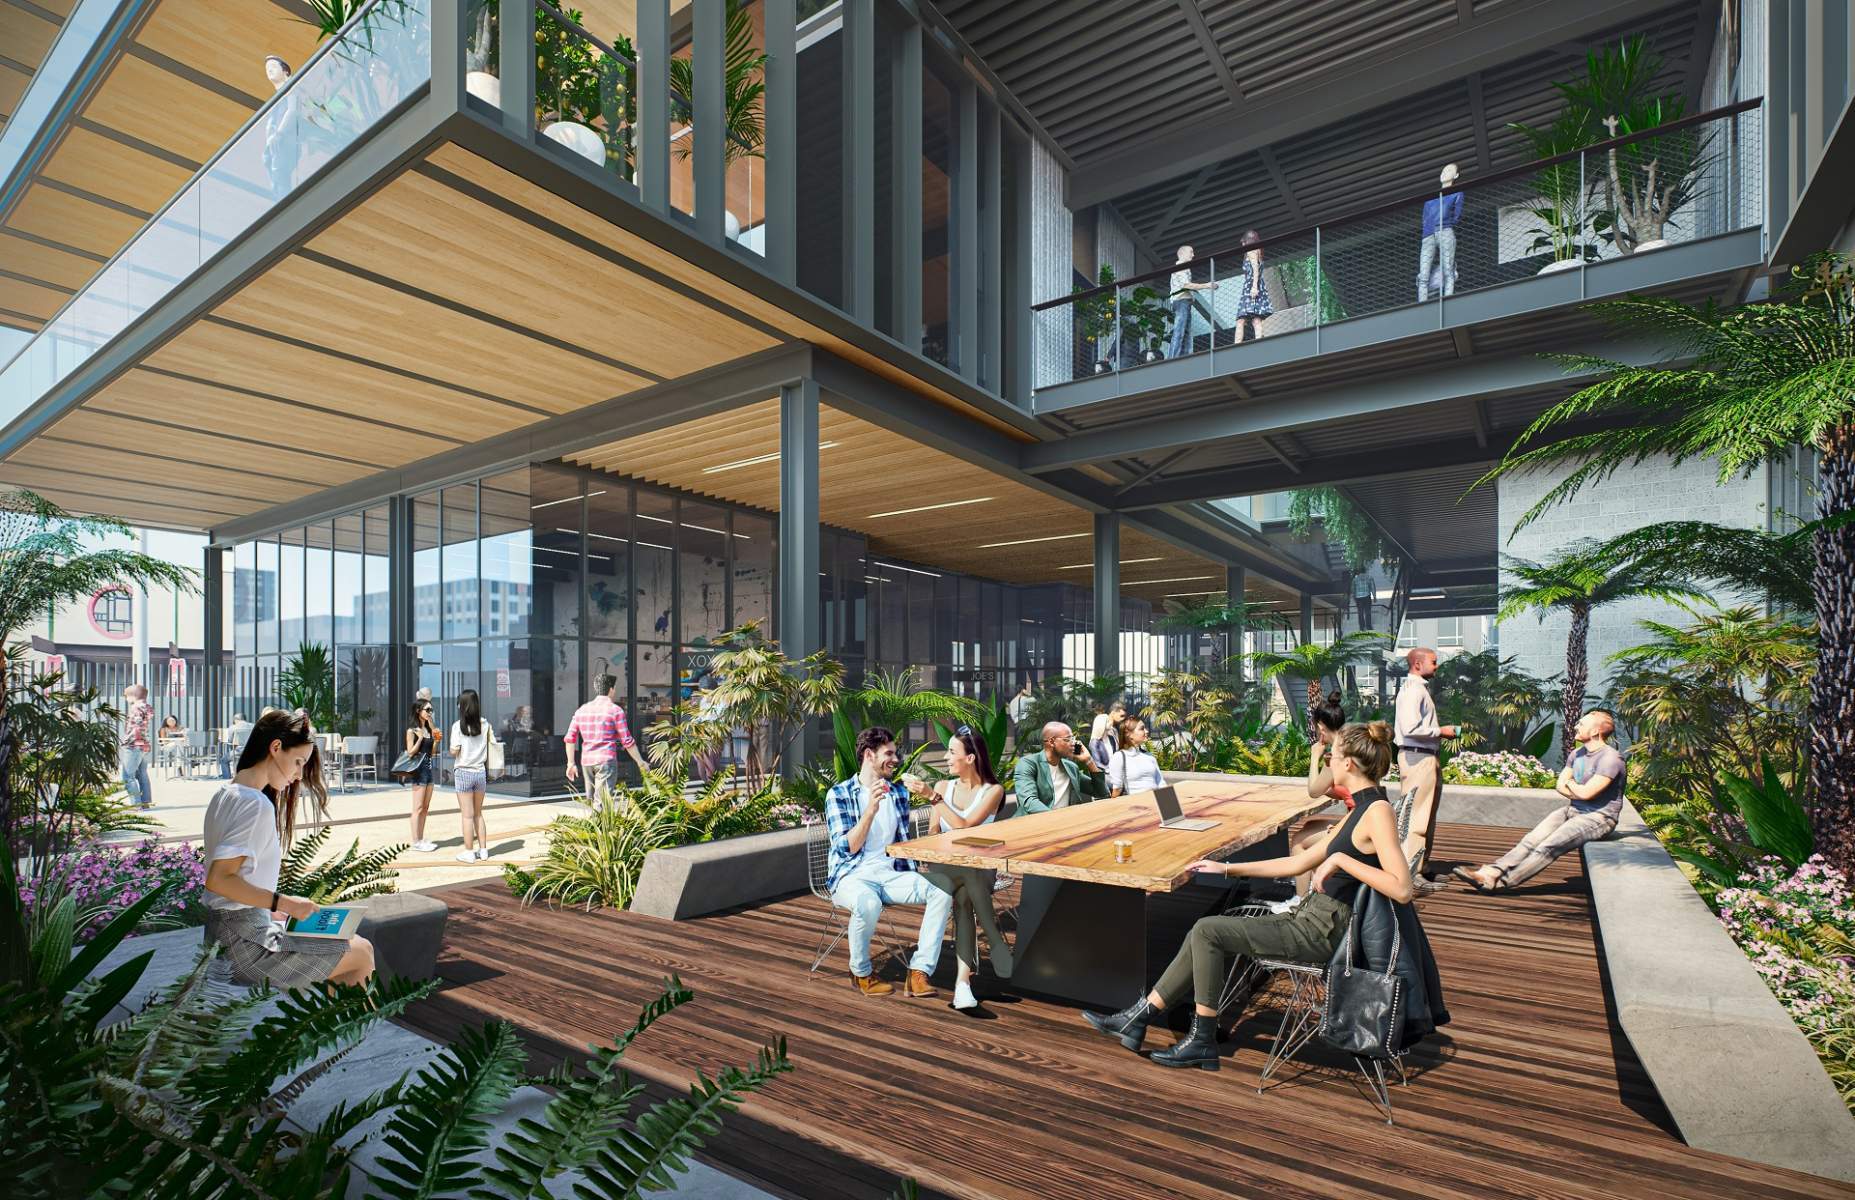 The building's amenities will include open common spaces.